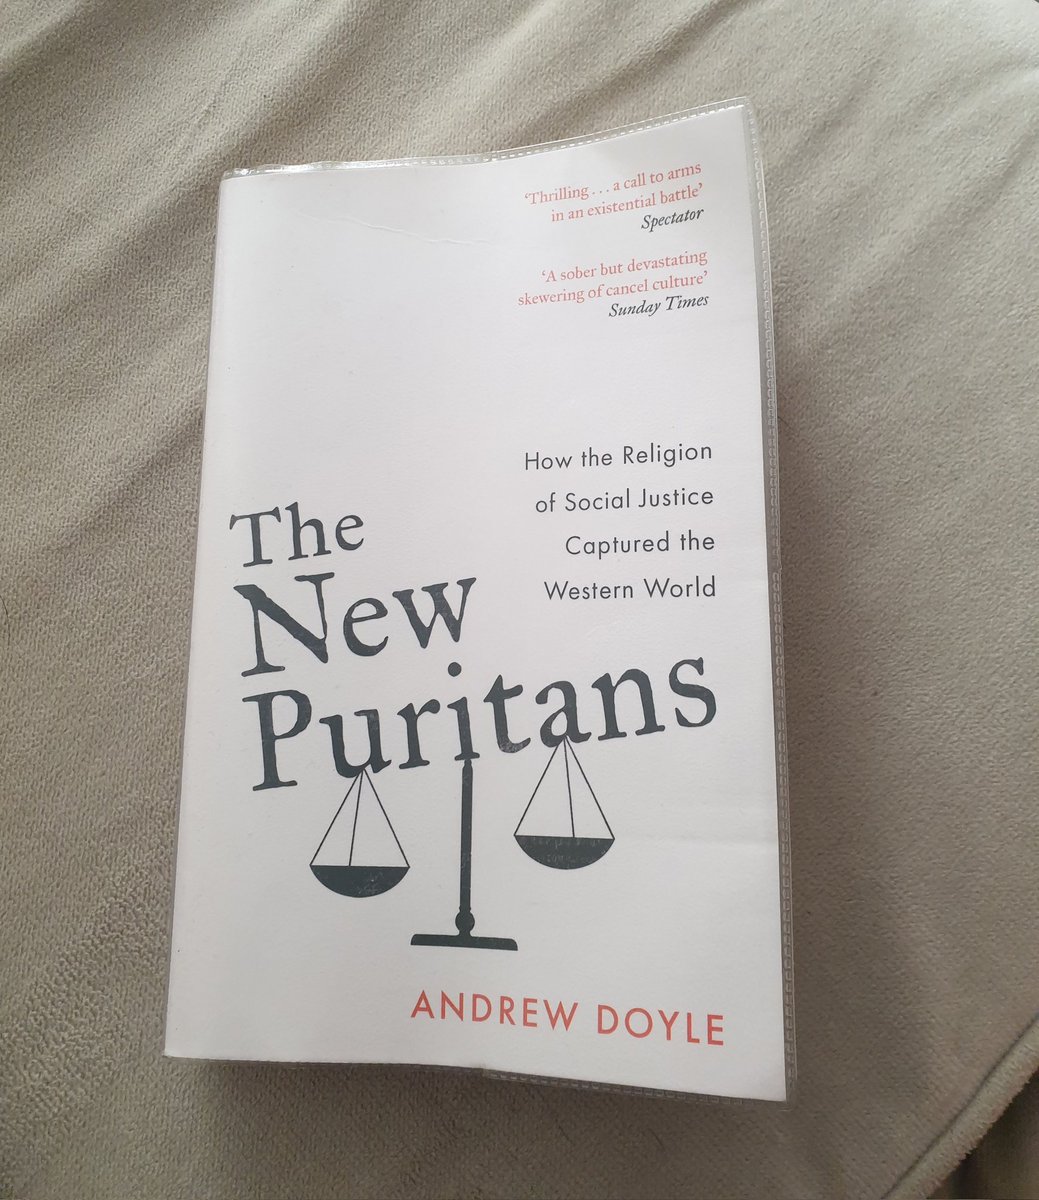 @andrewdoyle_com This is a bloody good book.